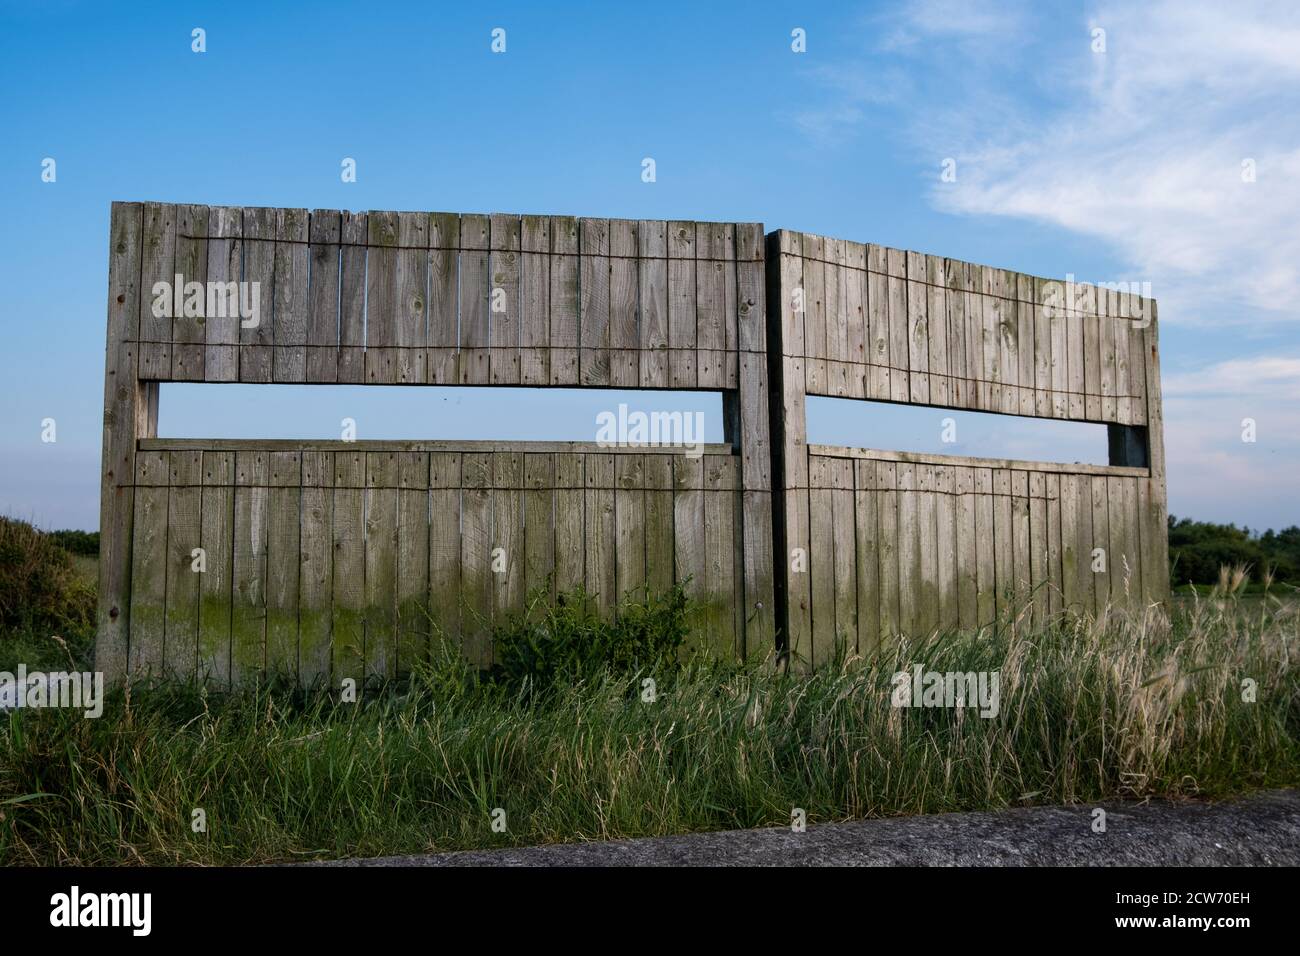 Artificial wooden structure for bird spotting in Leasowe Wirral June 2020 Stock Photo